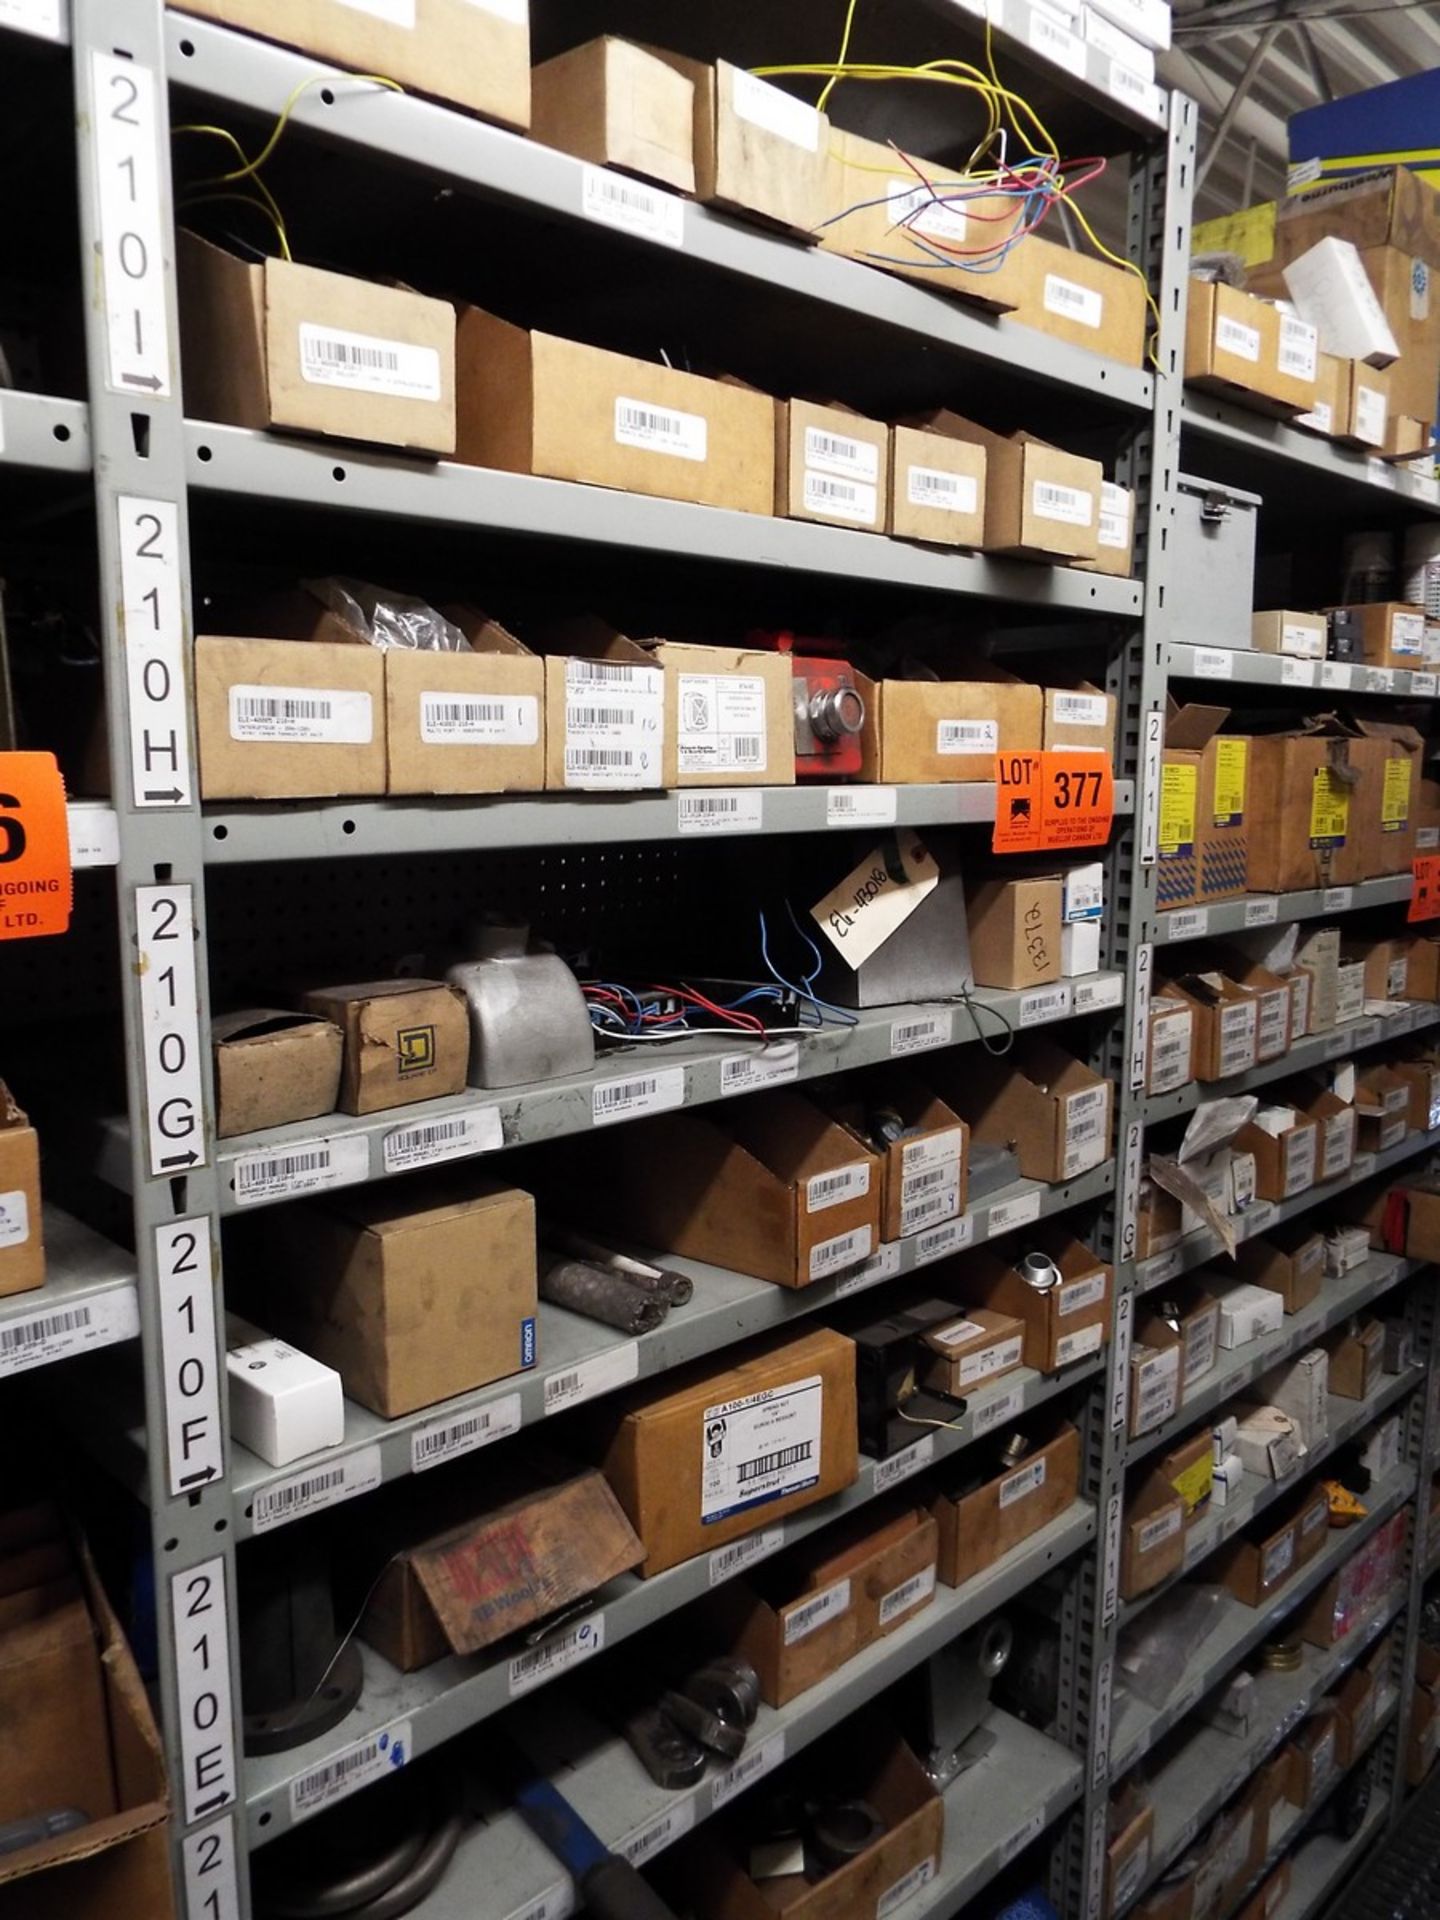 LOT/ CONTENTS OF SHELF - ELECTRICAL AND MECHANICAL SPARE PARTS